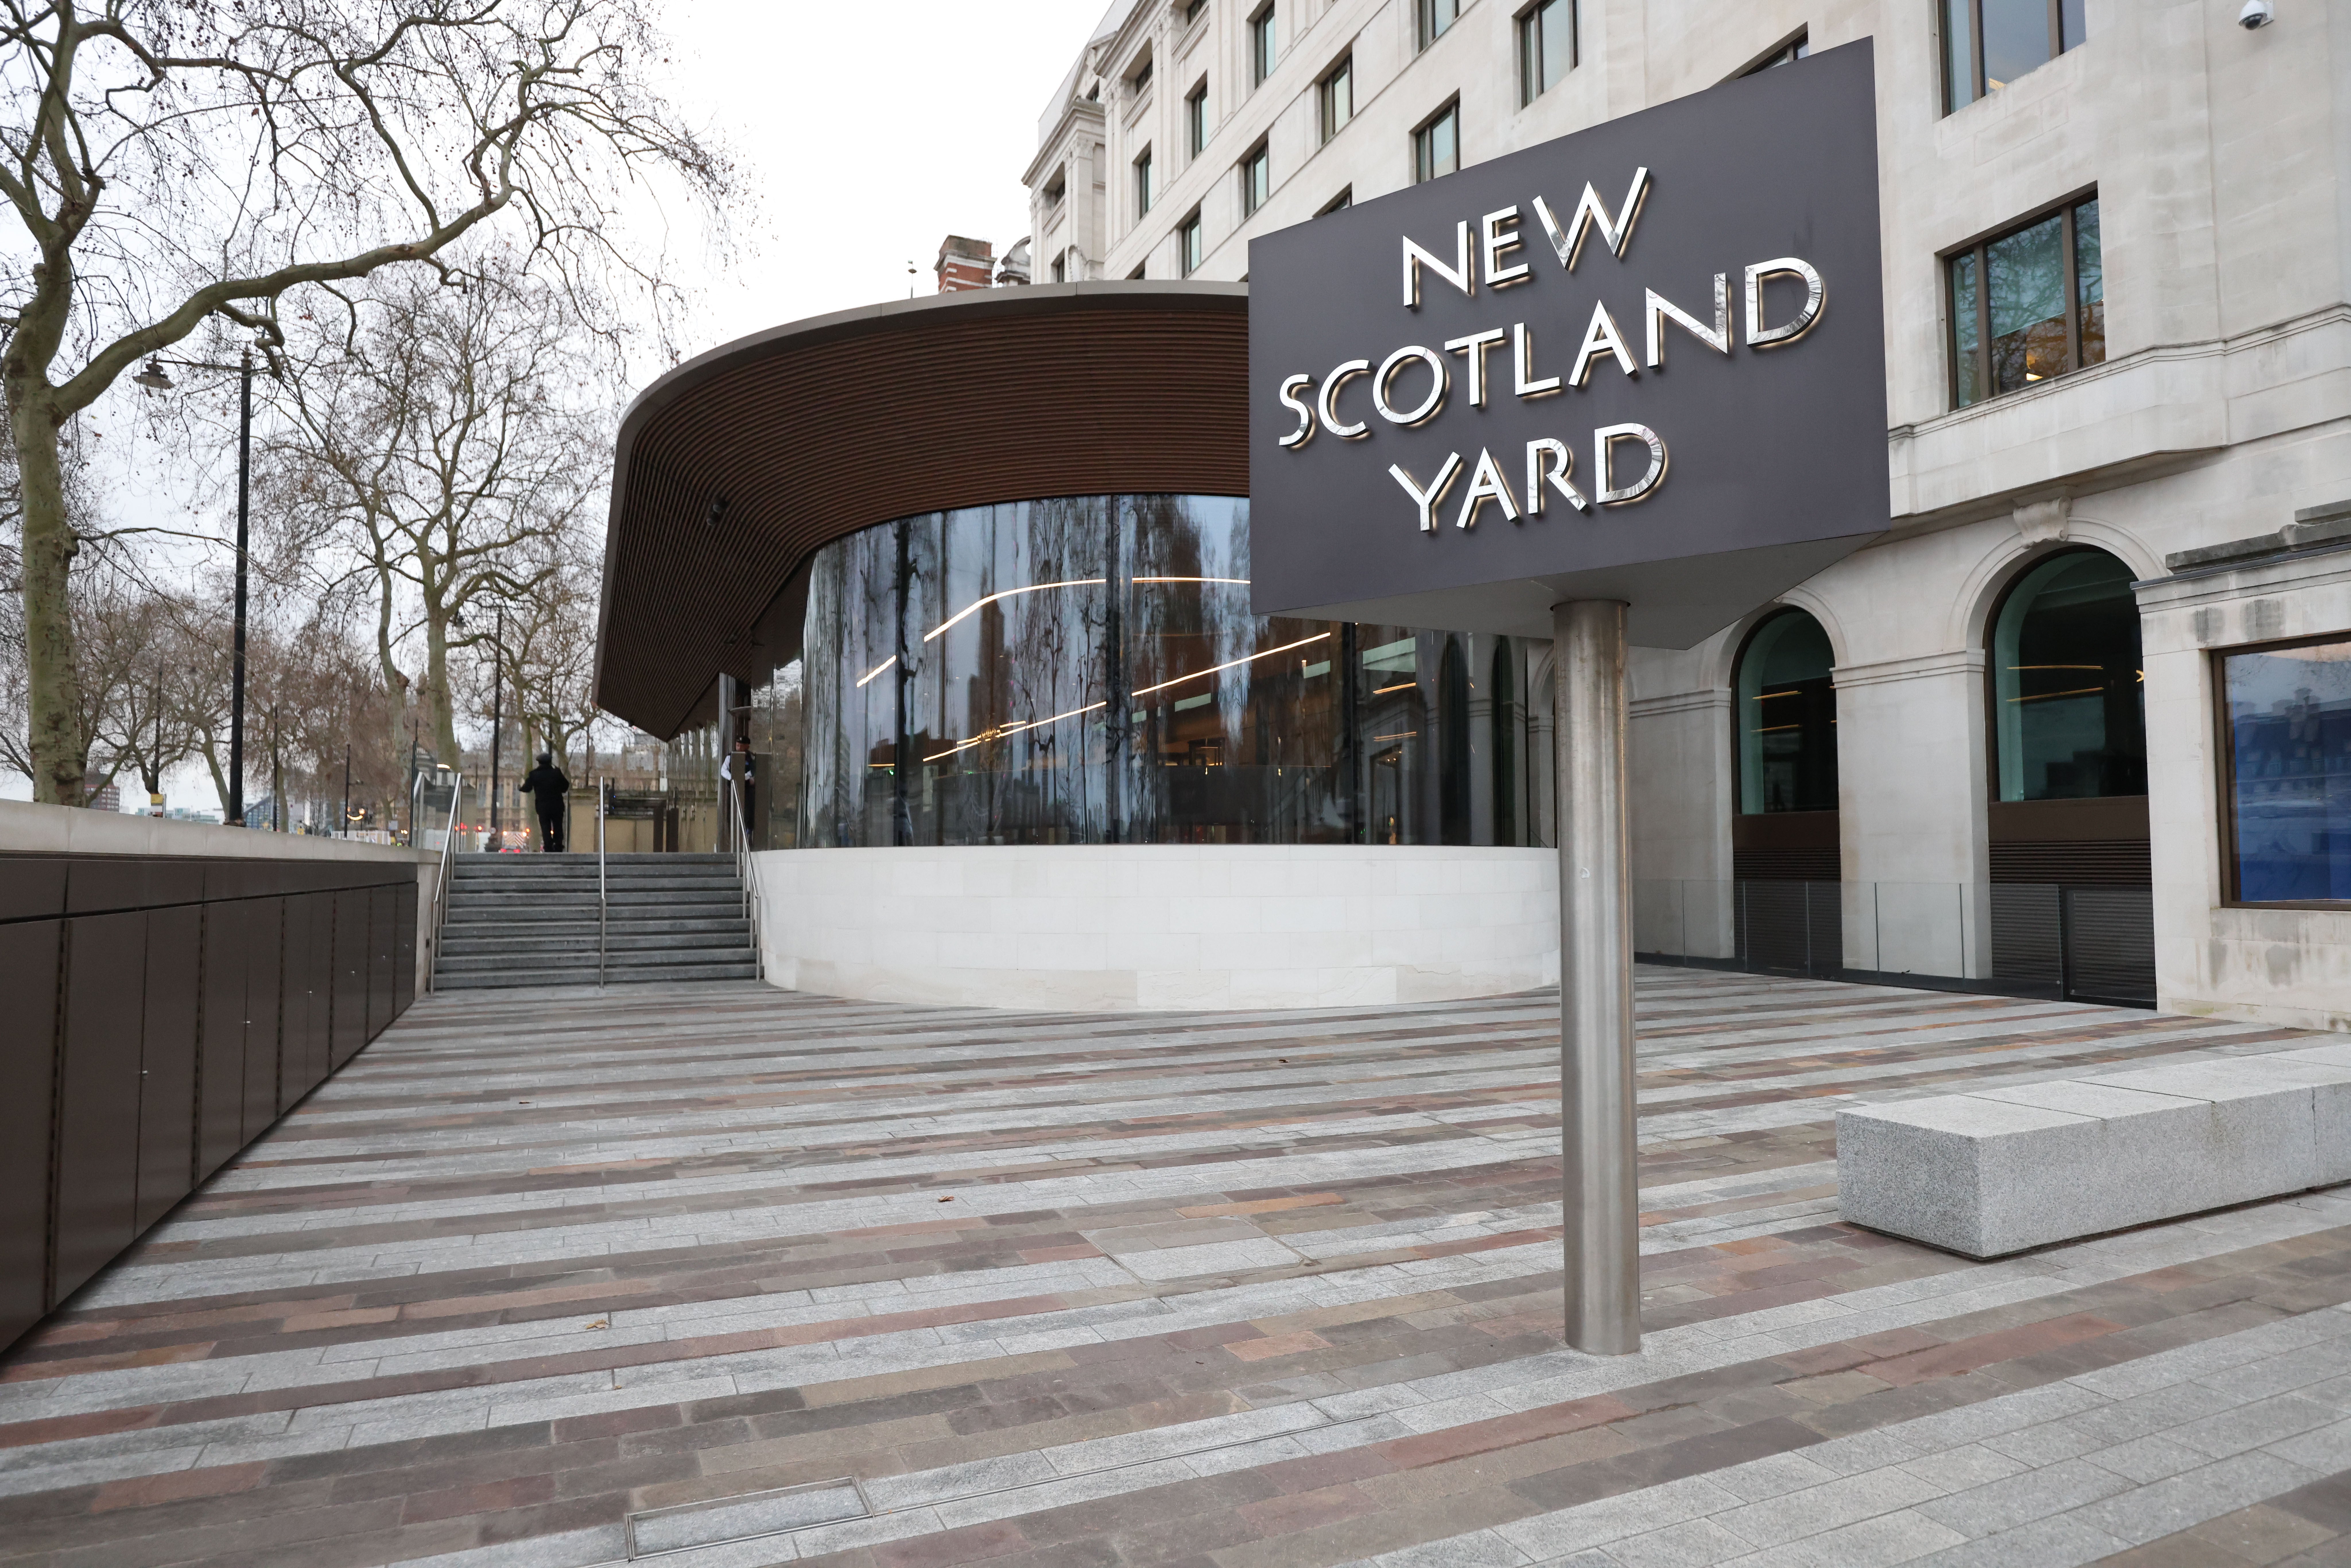 The Metropolitan Police has seen public trust fall amid a series of scandals